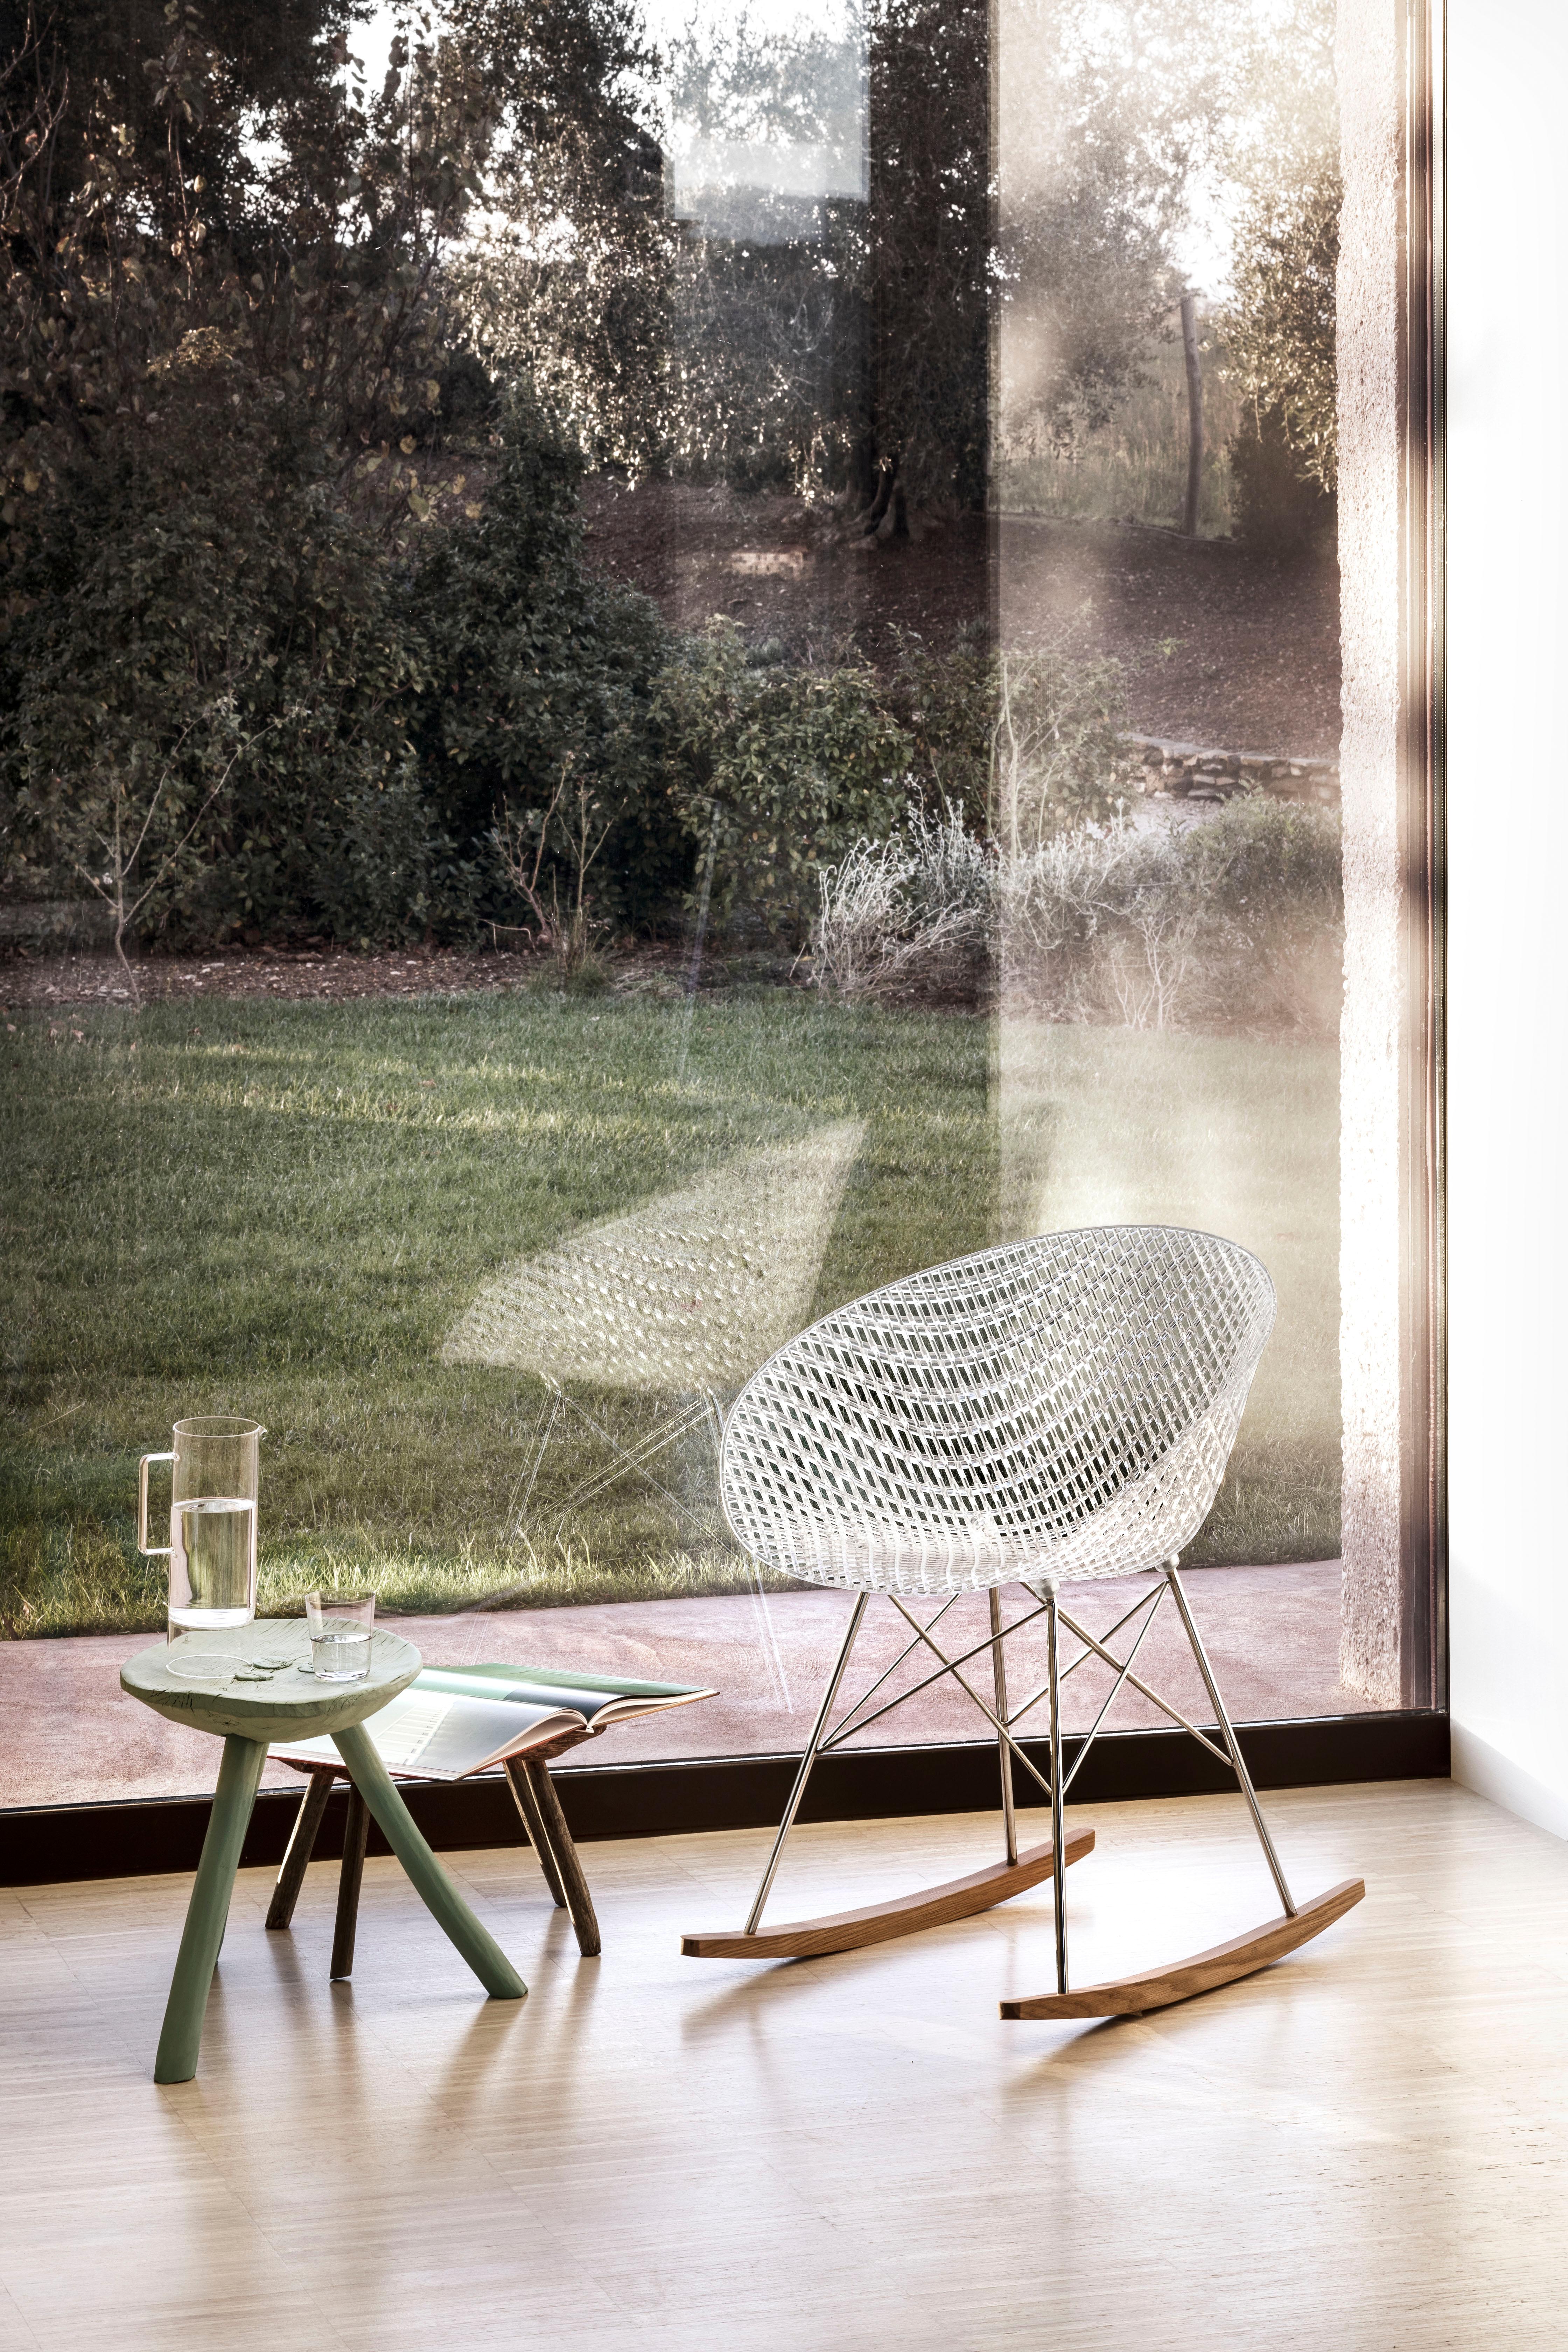 Contemporary Set 2Kartell Smatrik Rocking Chair in White with Chrome Legs by Tokujin Yoshioka For Sale